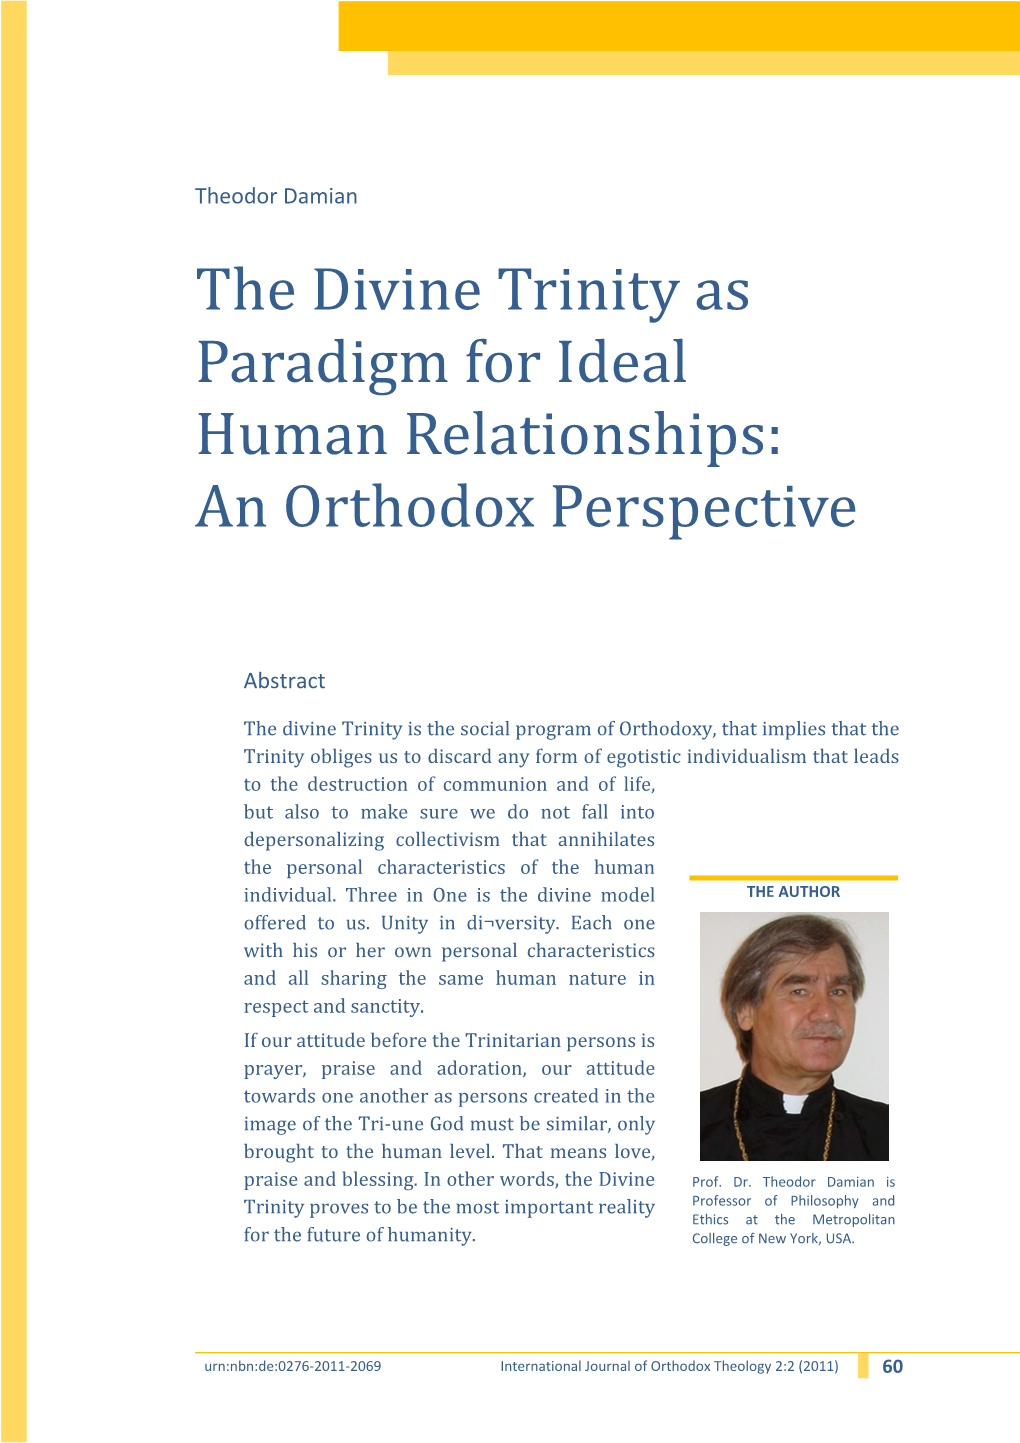 The Divine Trinity As Paradigm for Ideal Human Relationships: an Orthodox Perspective